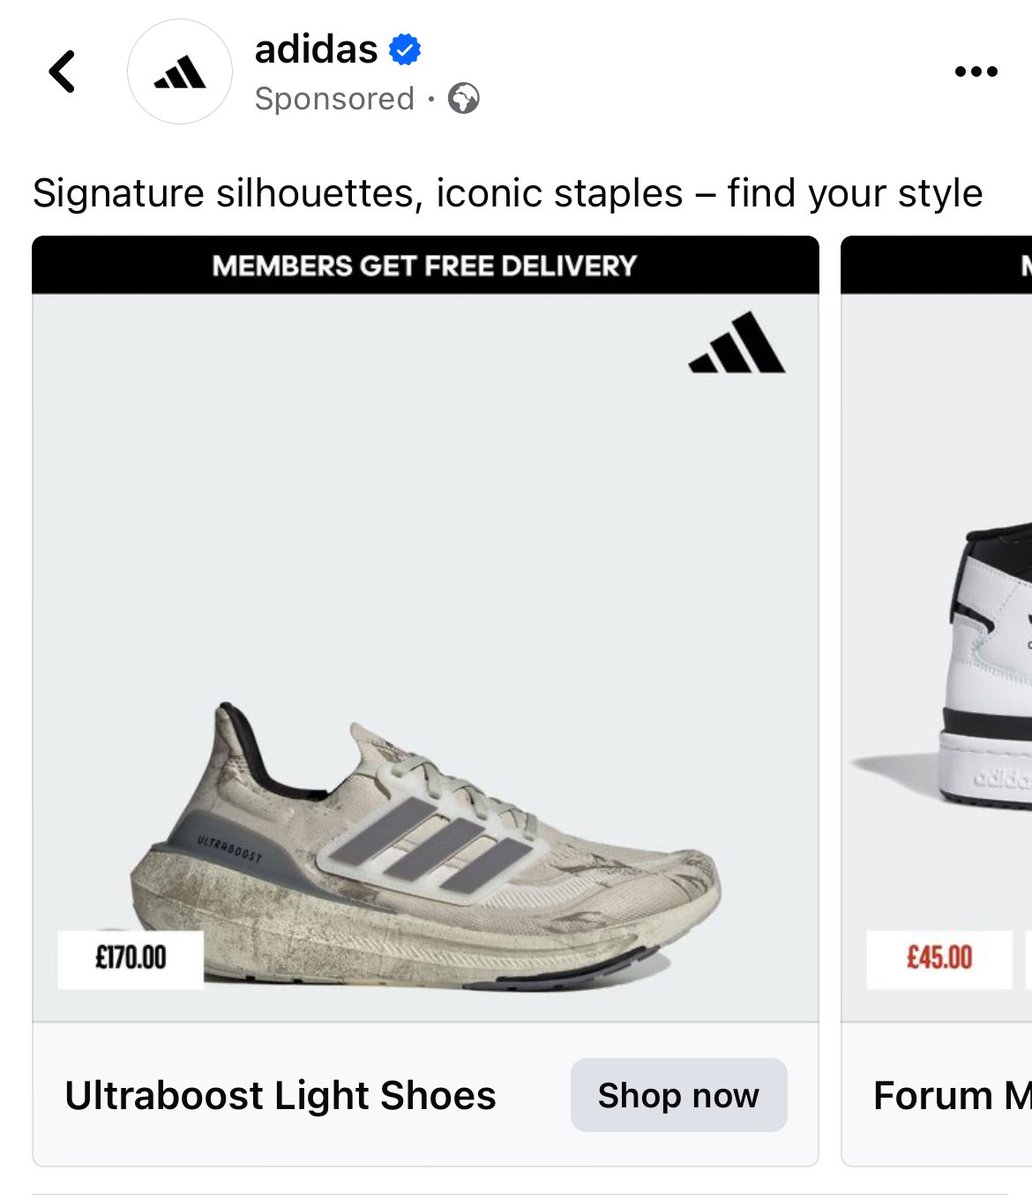 #Adidas offering brand new £170 shoes with design inspiration from 12 year old boys gymbag. Who wants them? As i can fish similar out of a skip for £80